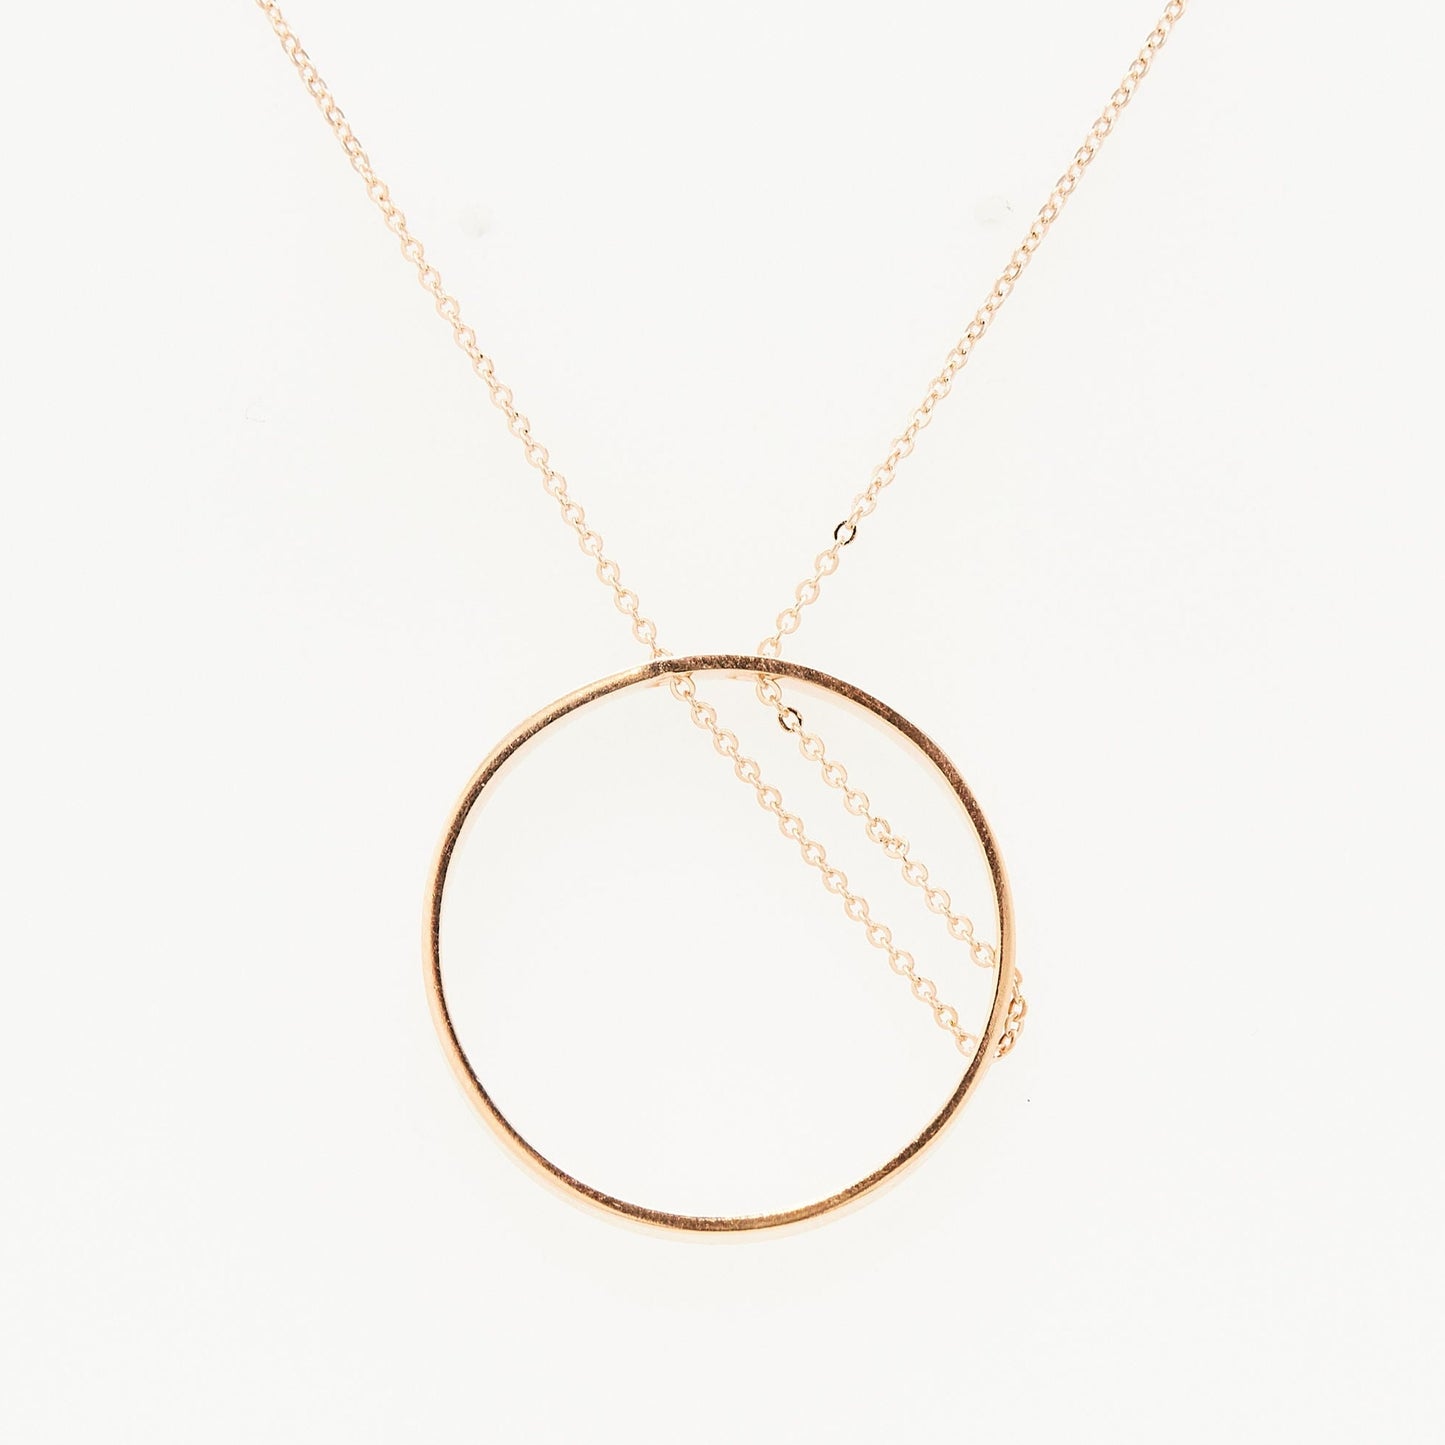 rose gold open circle necklace with chain threaded through on white background